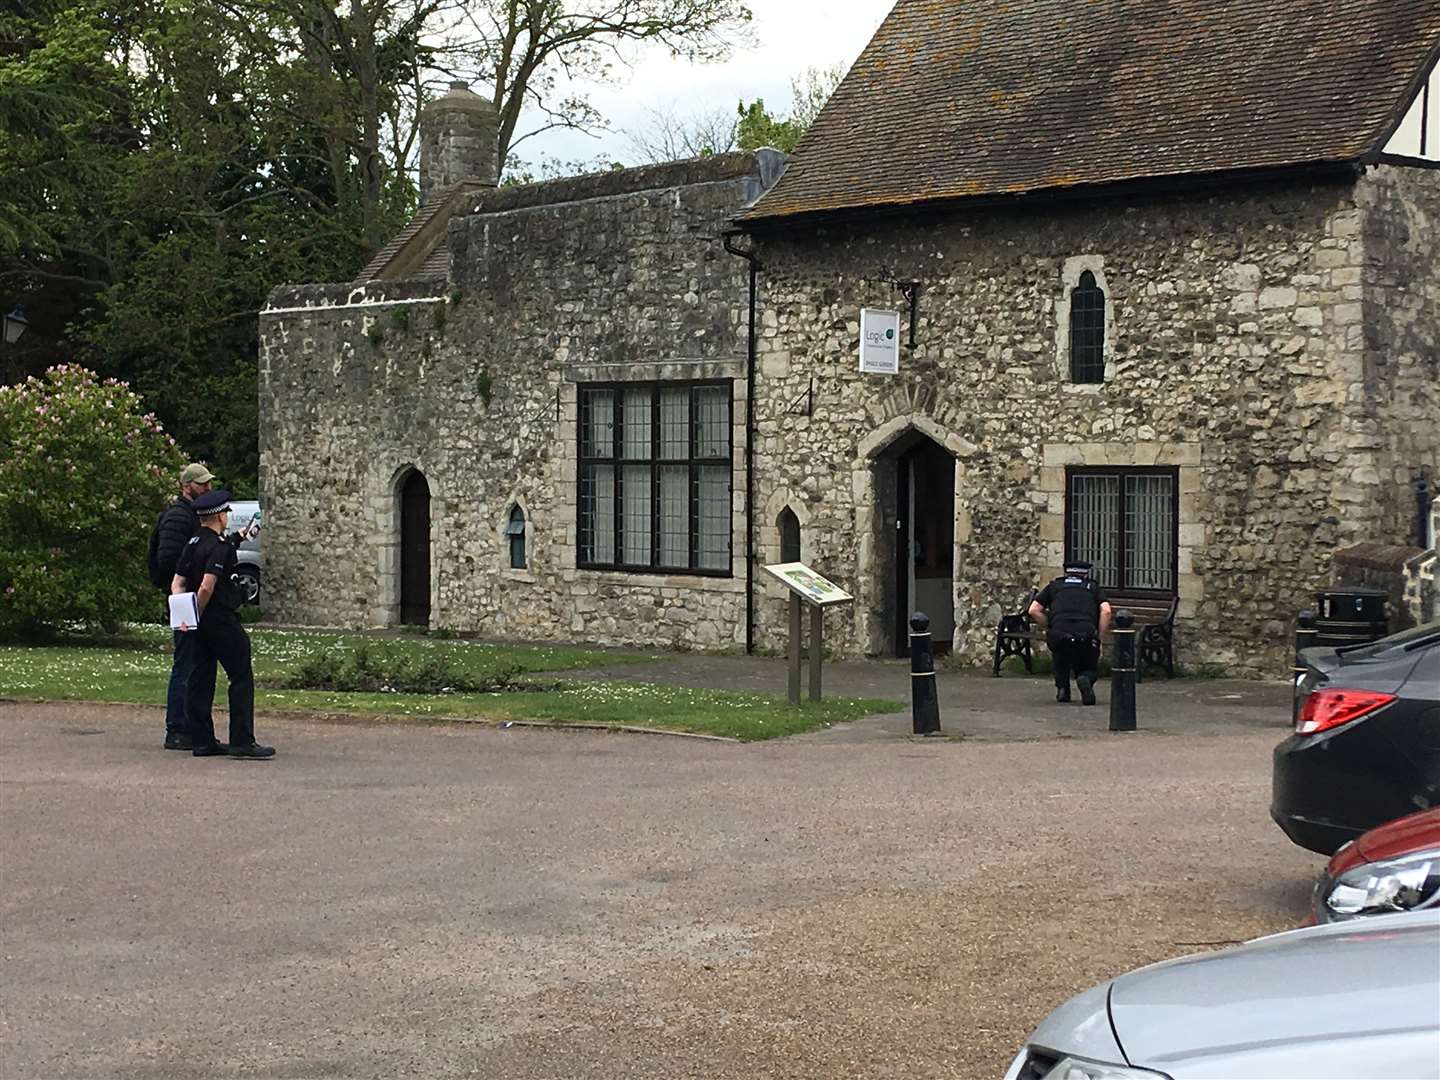 Police near the Archbishop's Palace in Maidstone (9547486)